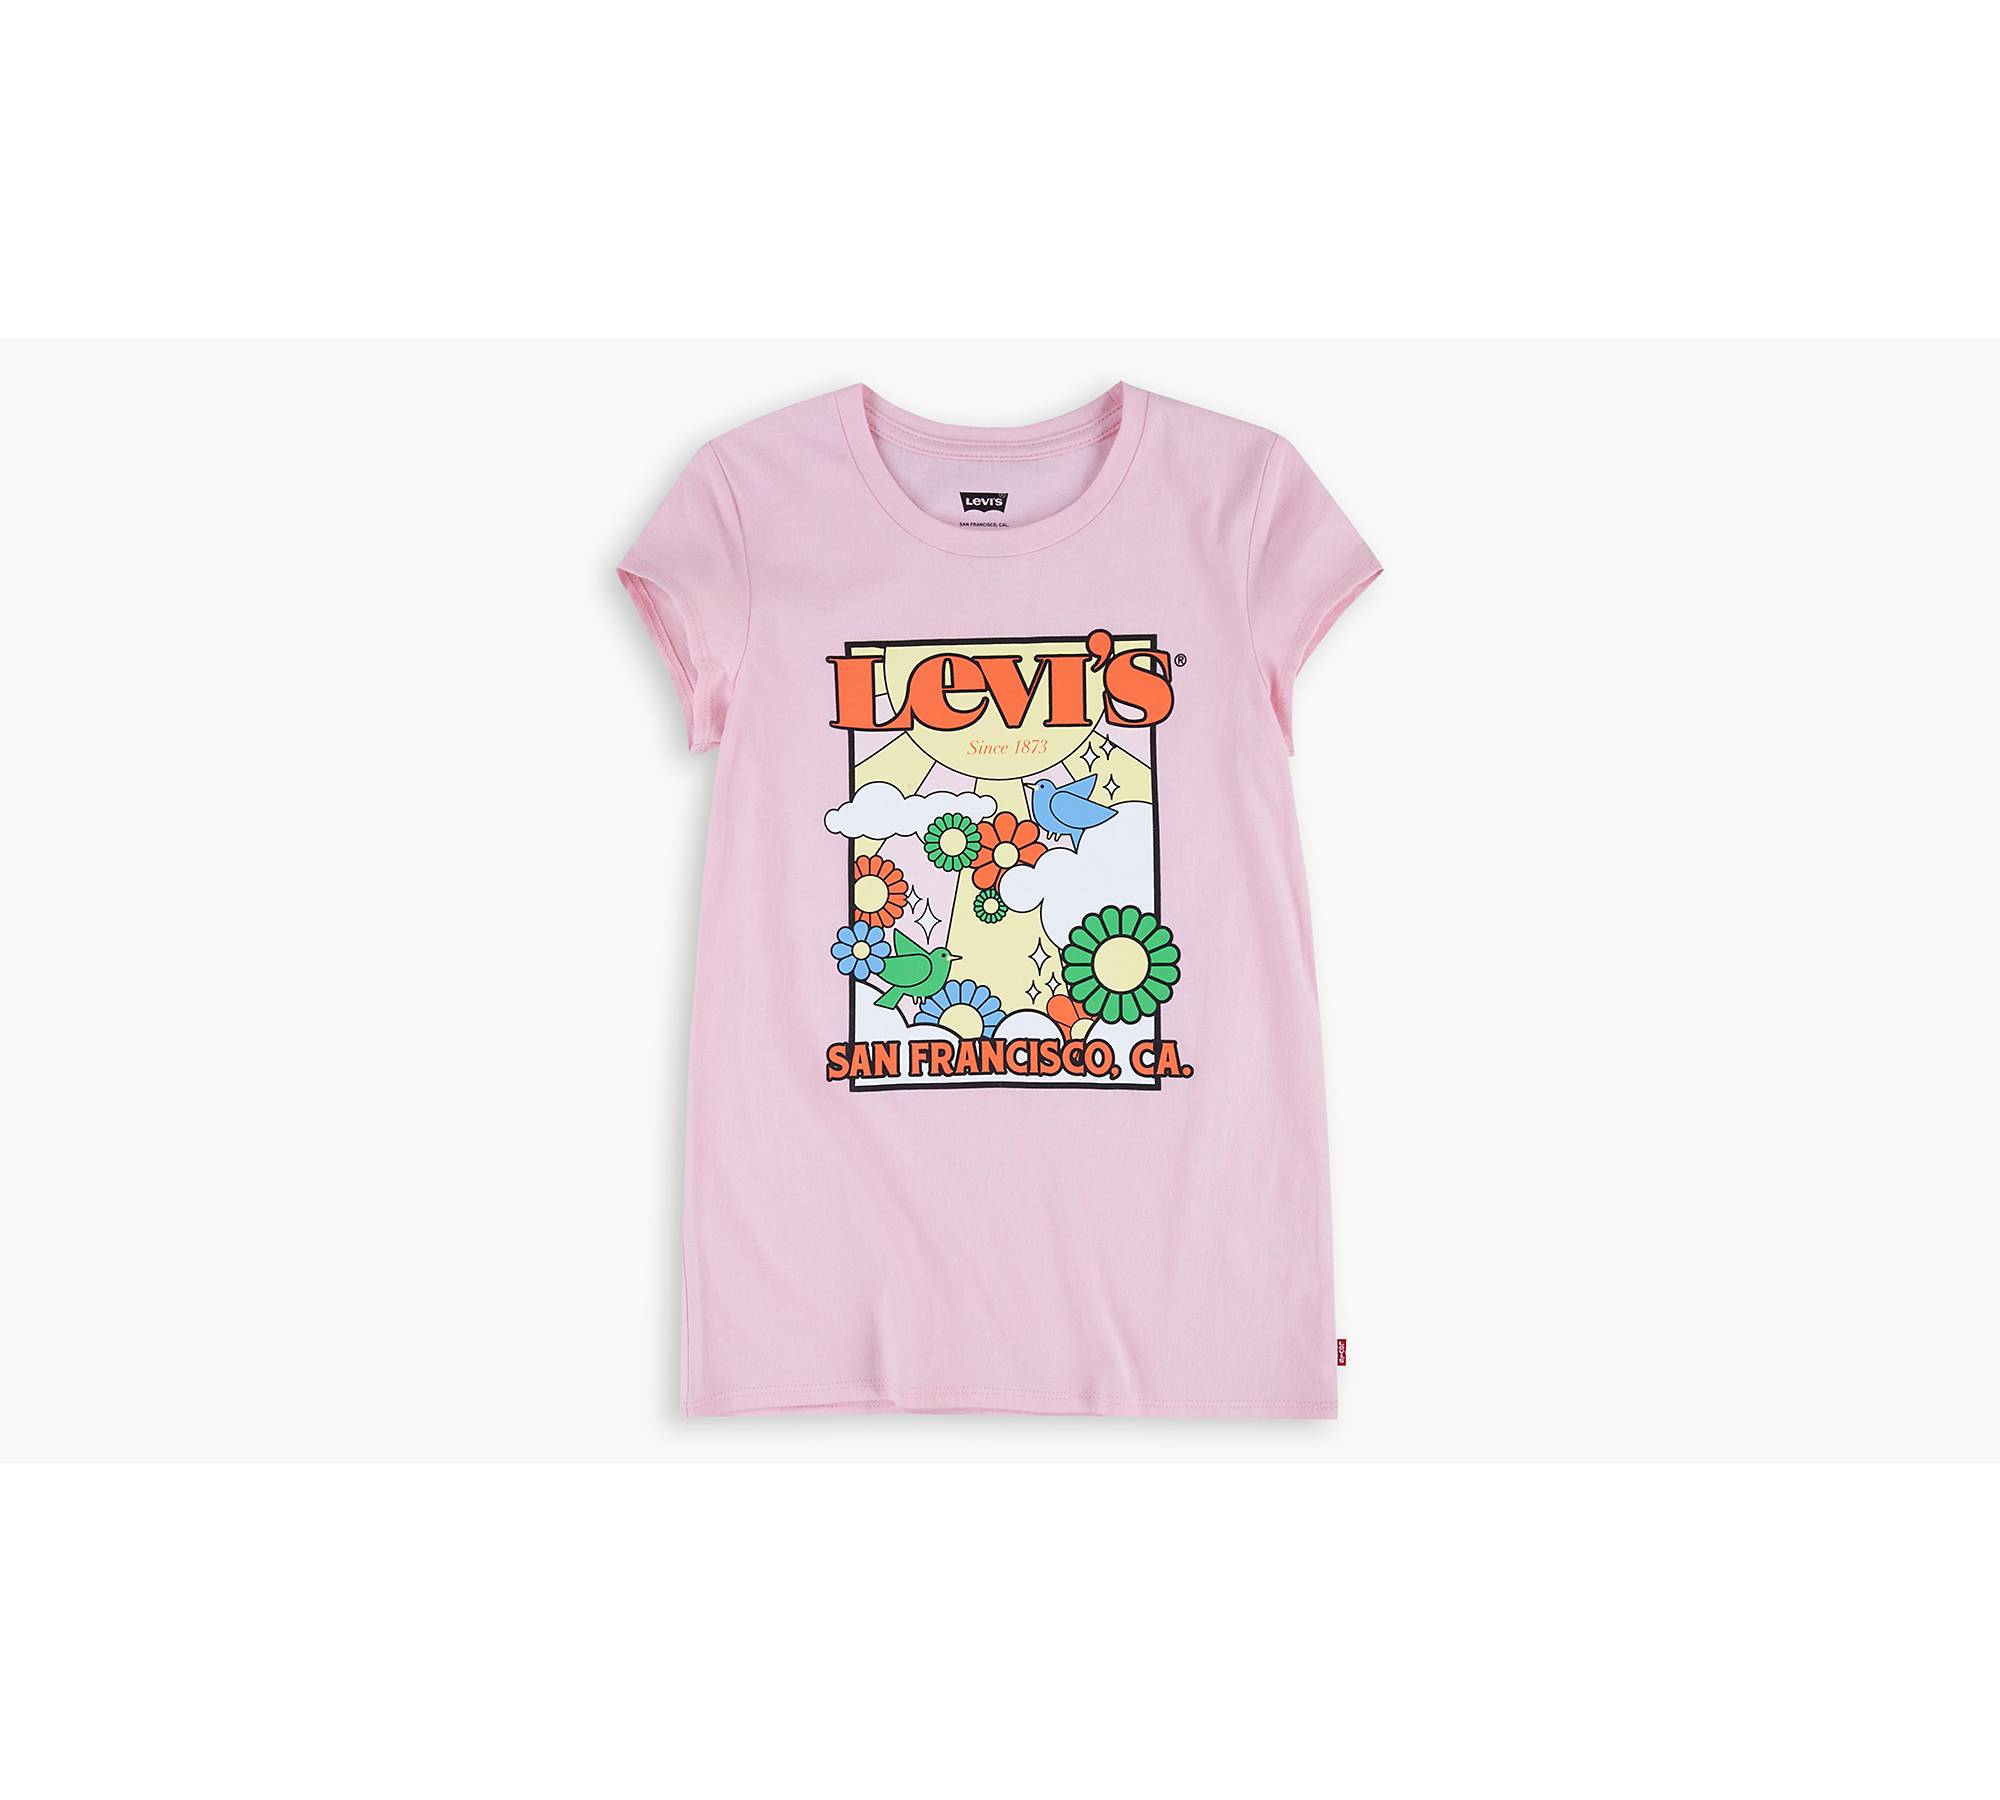 Levis T-shirt - Pink - OUT OF STOCK